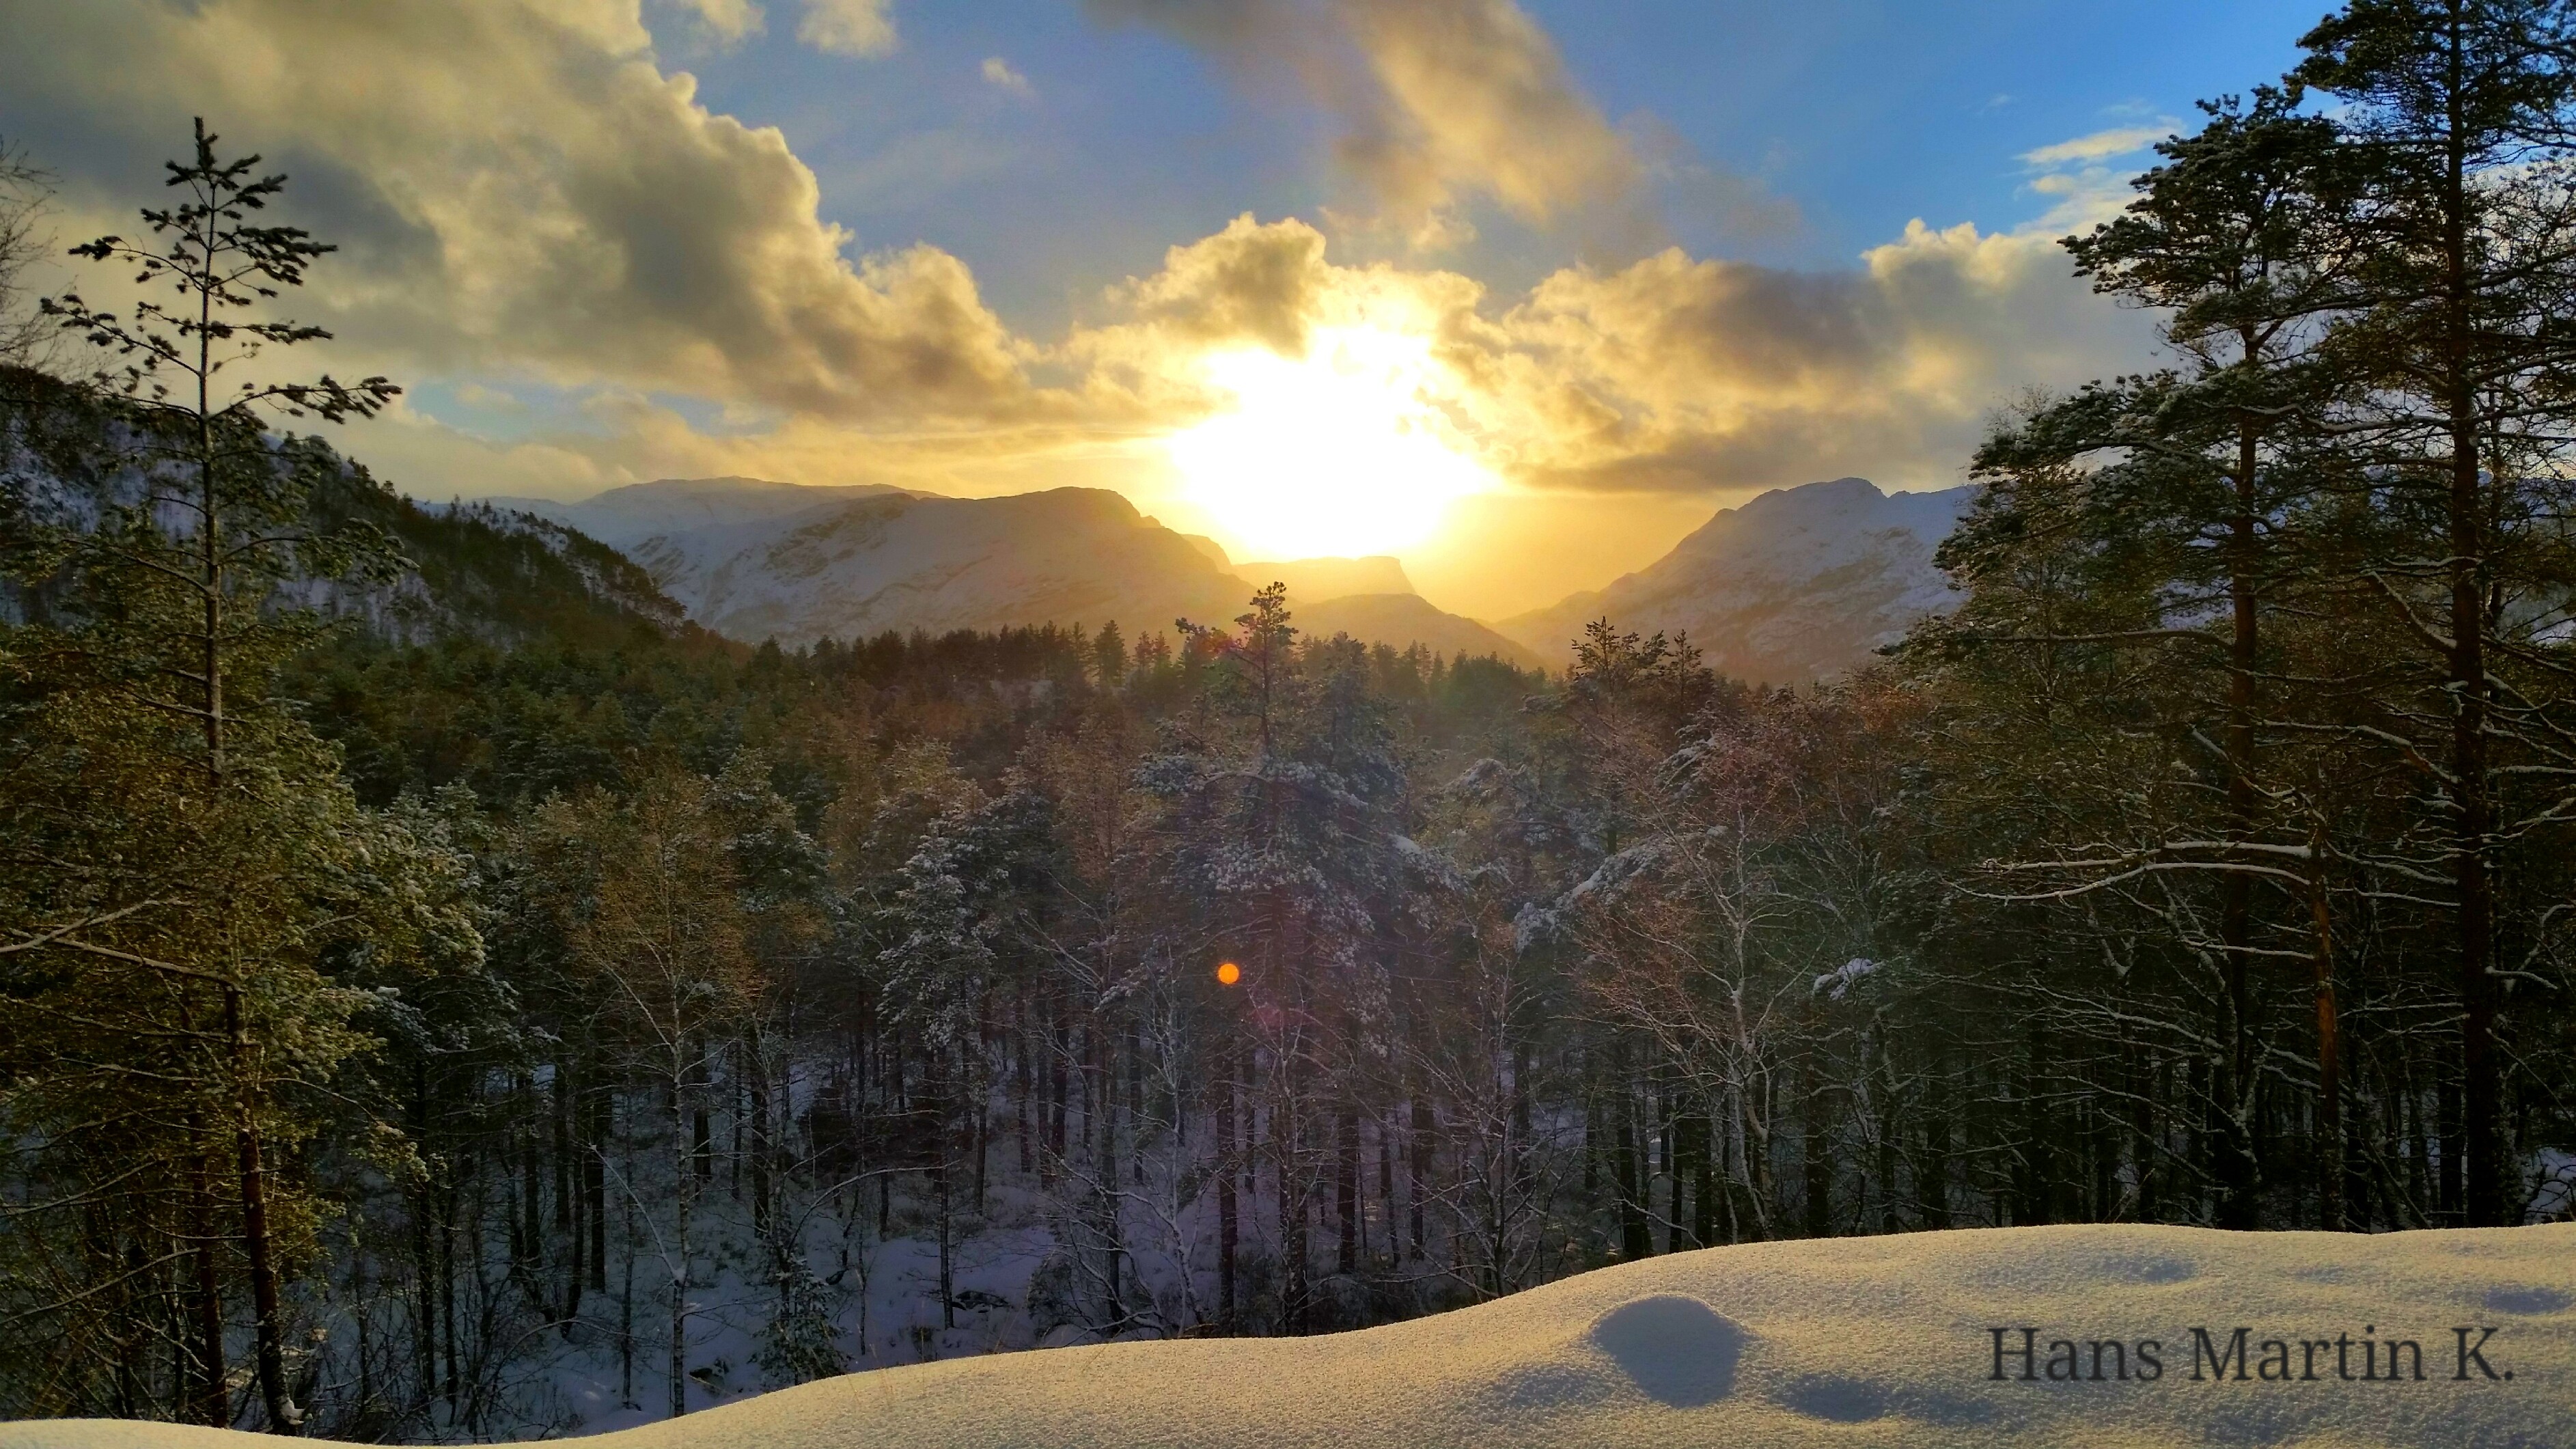 General 3771x2121 Norway snow mountains forest nordic landscapes nature winter cold ice trees sunlight